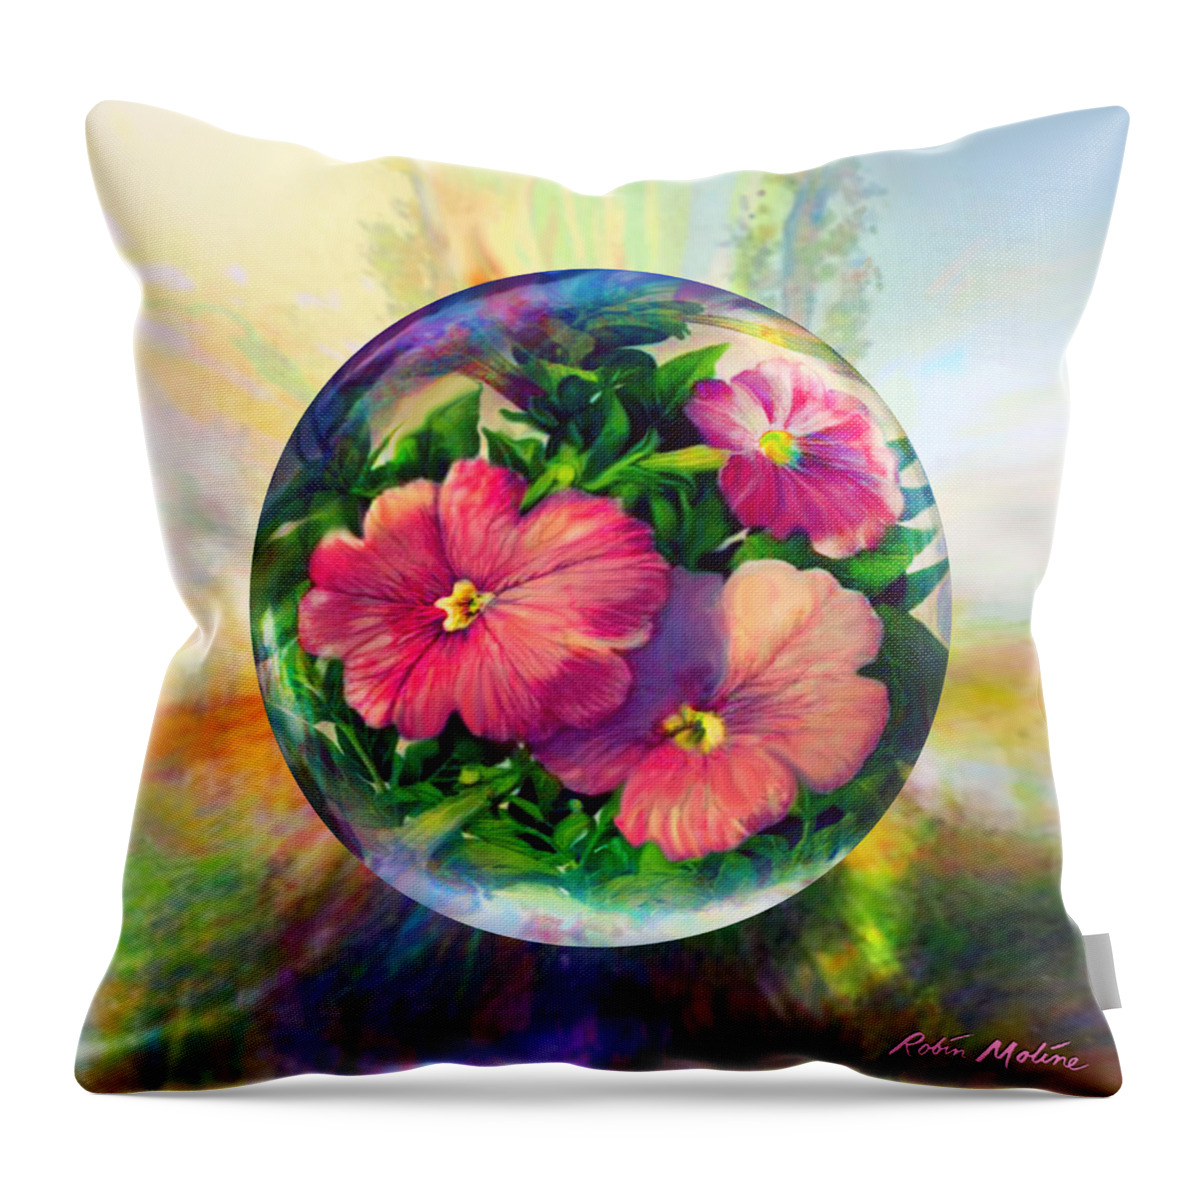  Art Globes Throw Pillow featuring the painting Flowering Panopticon by Robin Moline